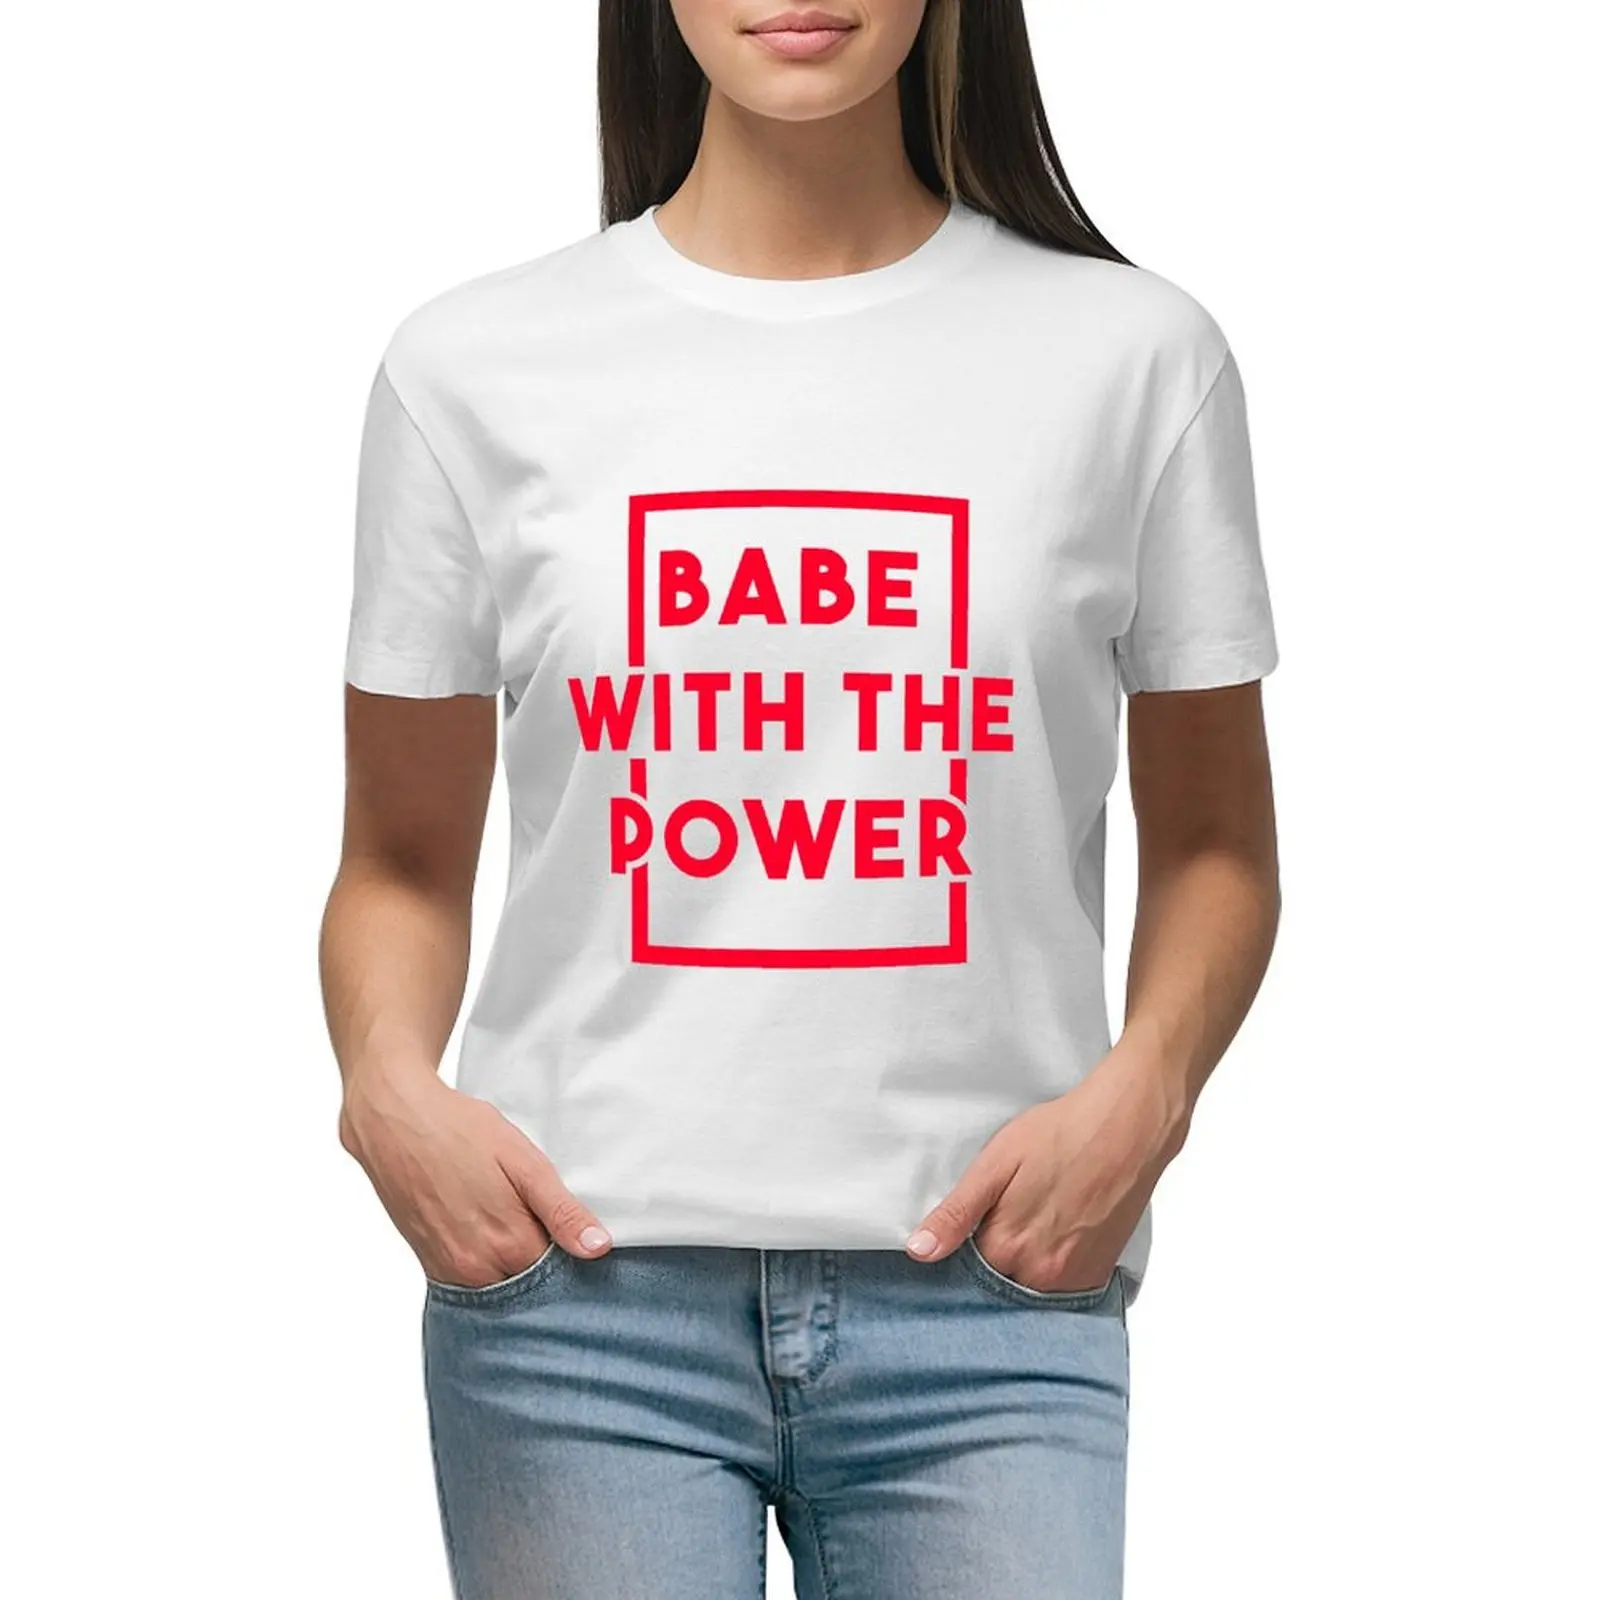 

Babe With The Power T-shirt Aesthetic clothing summer tops funny oversized t shirts for Women